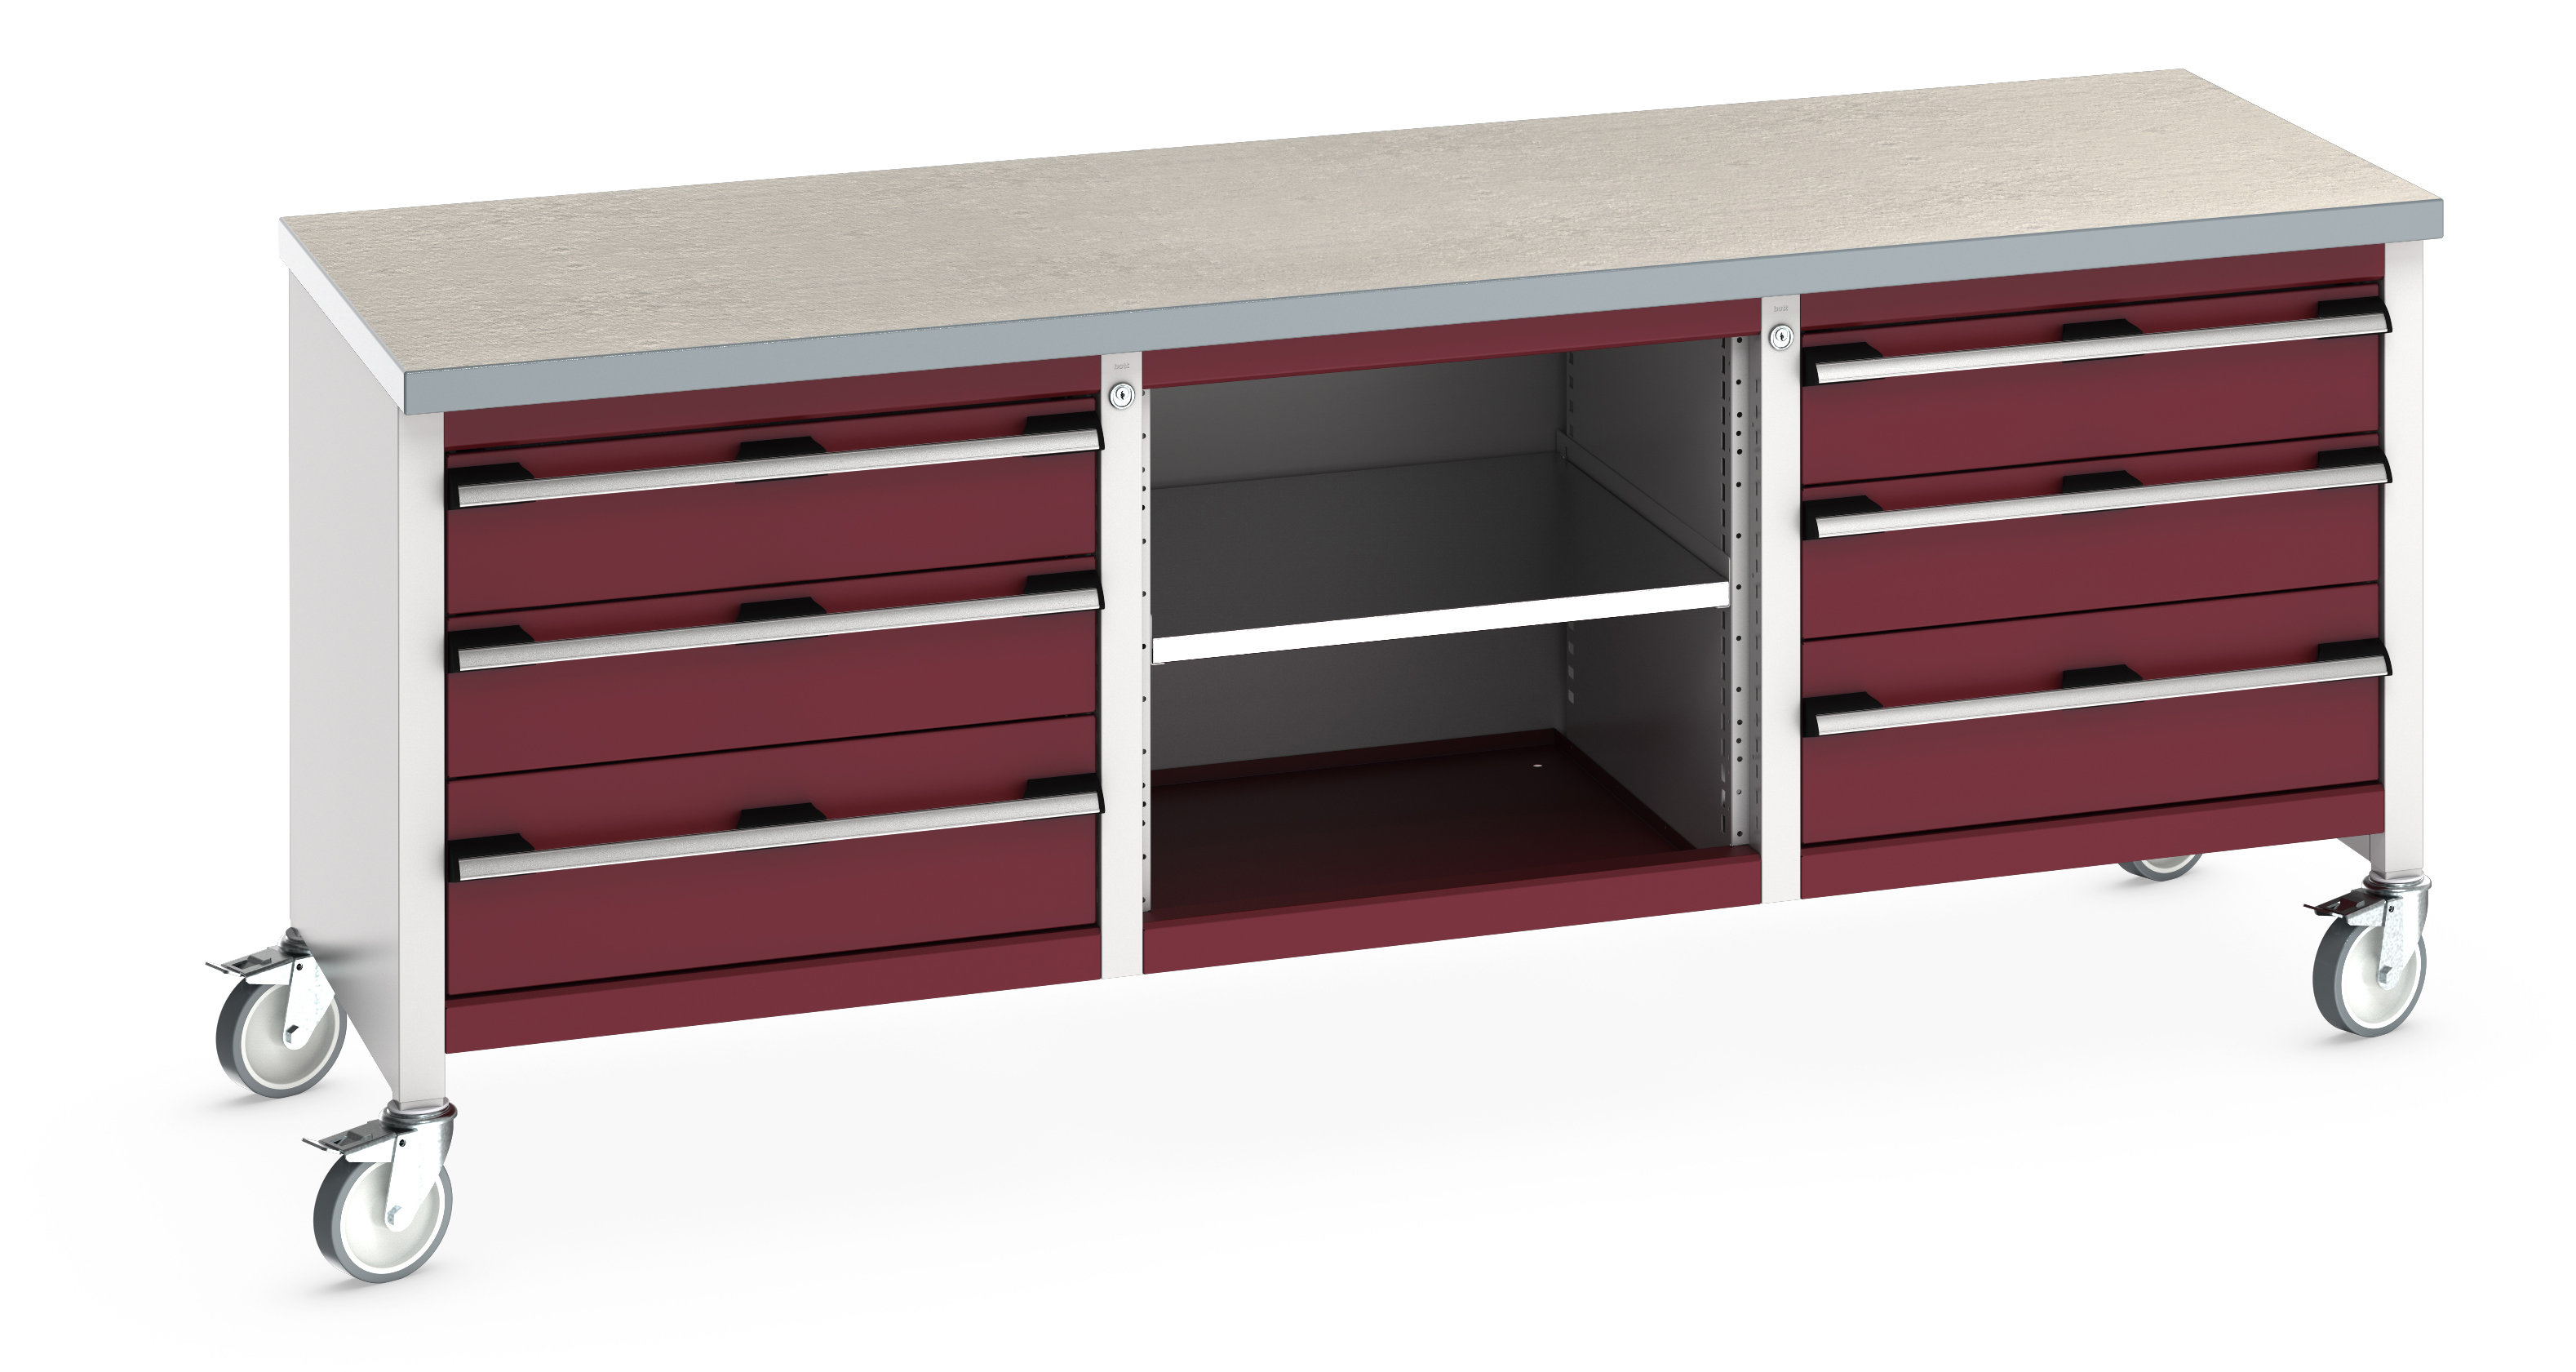 Bott Cubio Mobile Storage Bench With 3 Drawer Cabinet / Open Cupboard / 3 Drawer Cabinet - 41002132.24V